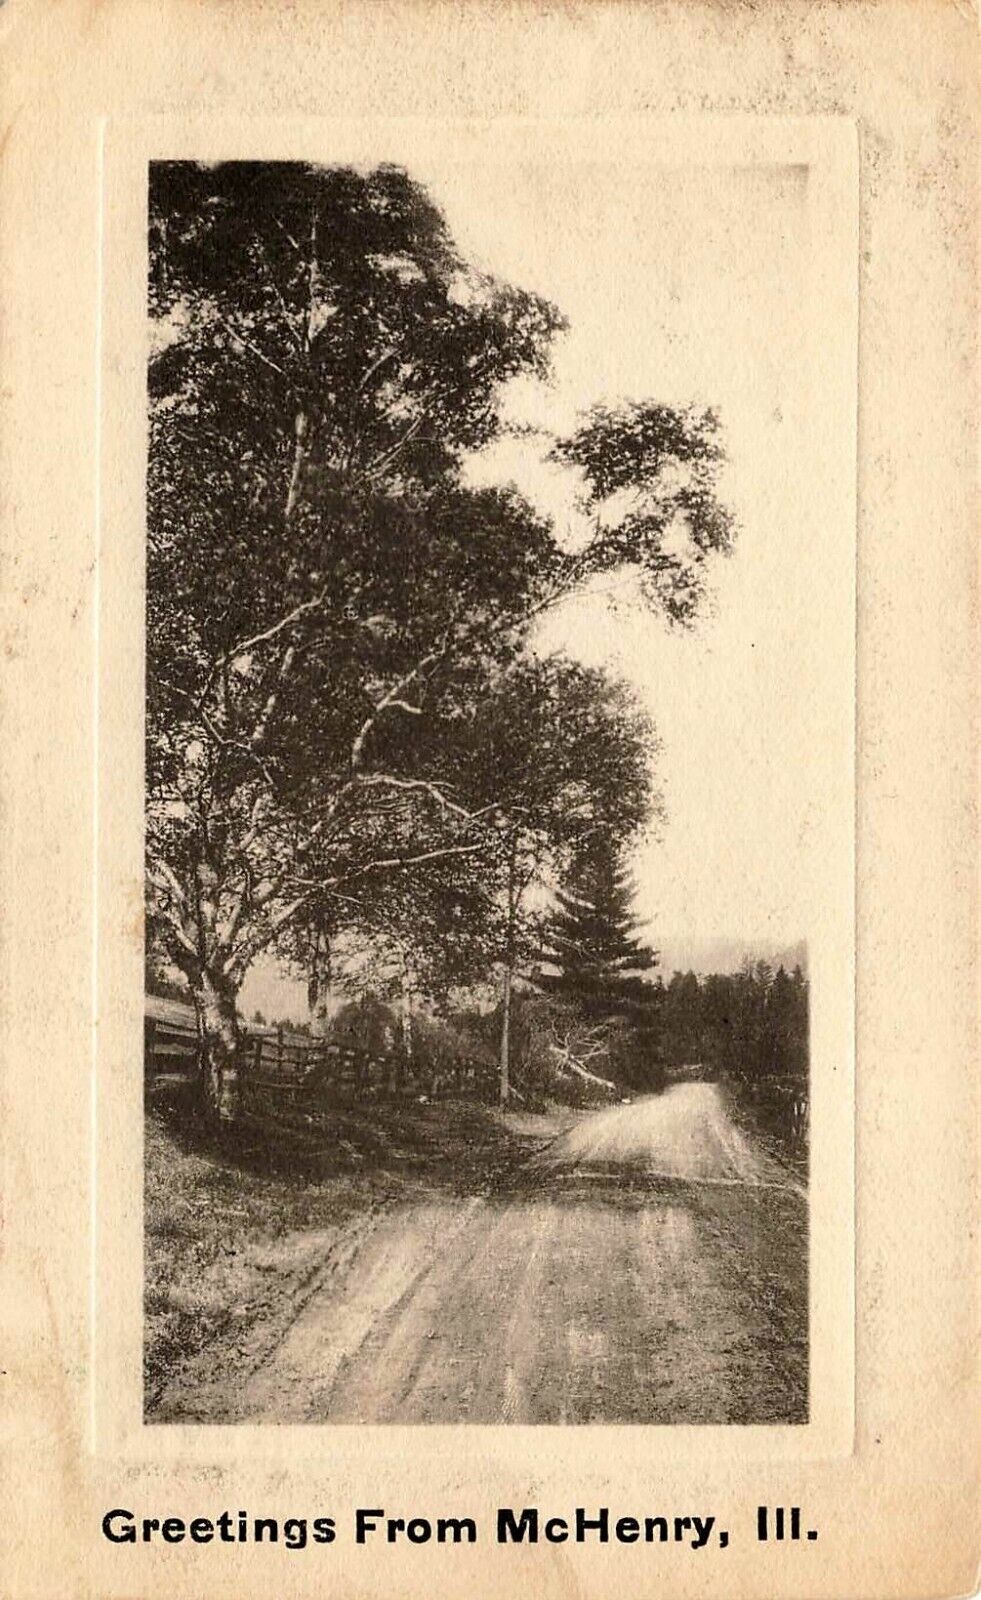 ILLINOIS PHOTO POSTCARD: ROAD VIEW GREETINGS FROM McHENRY, IL